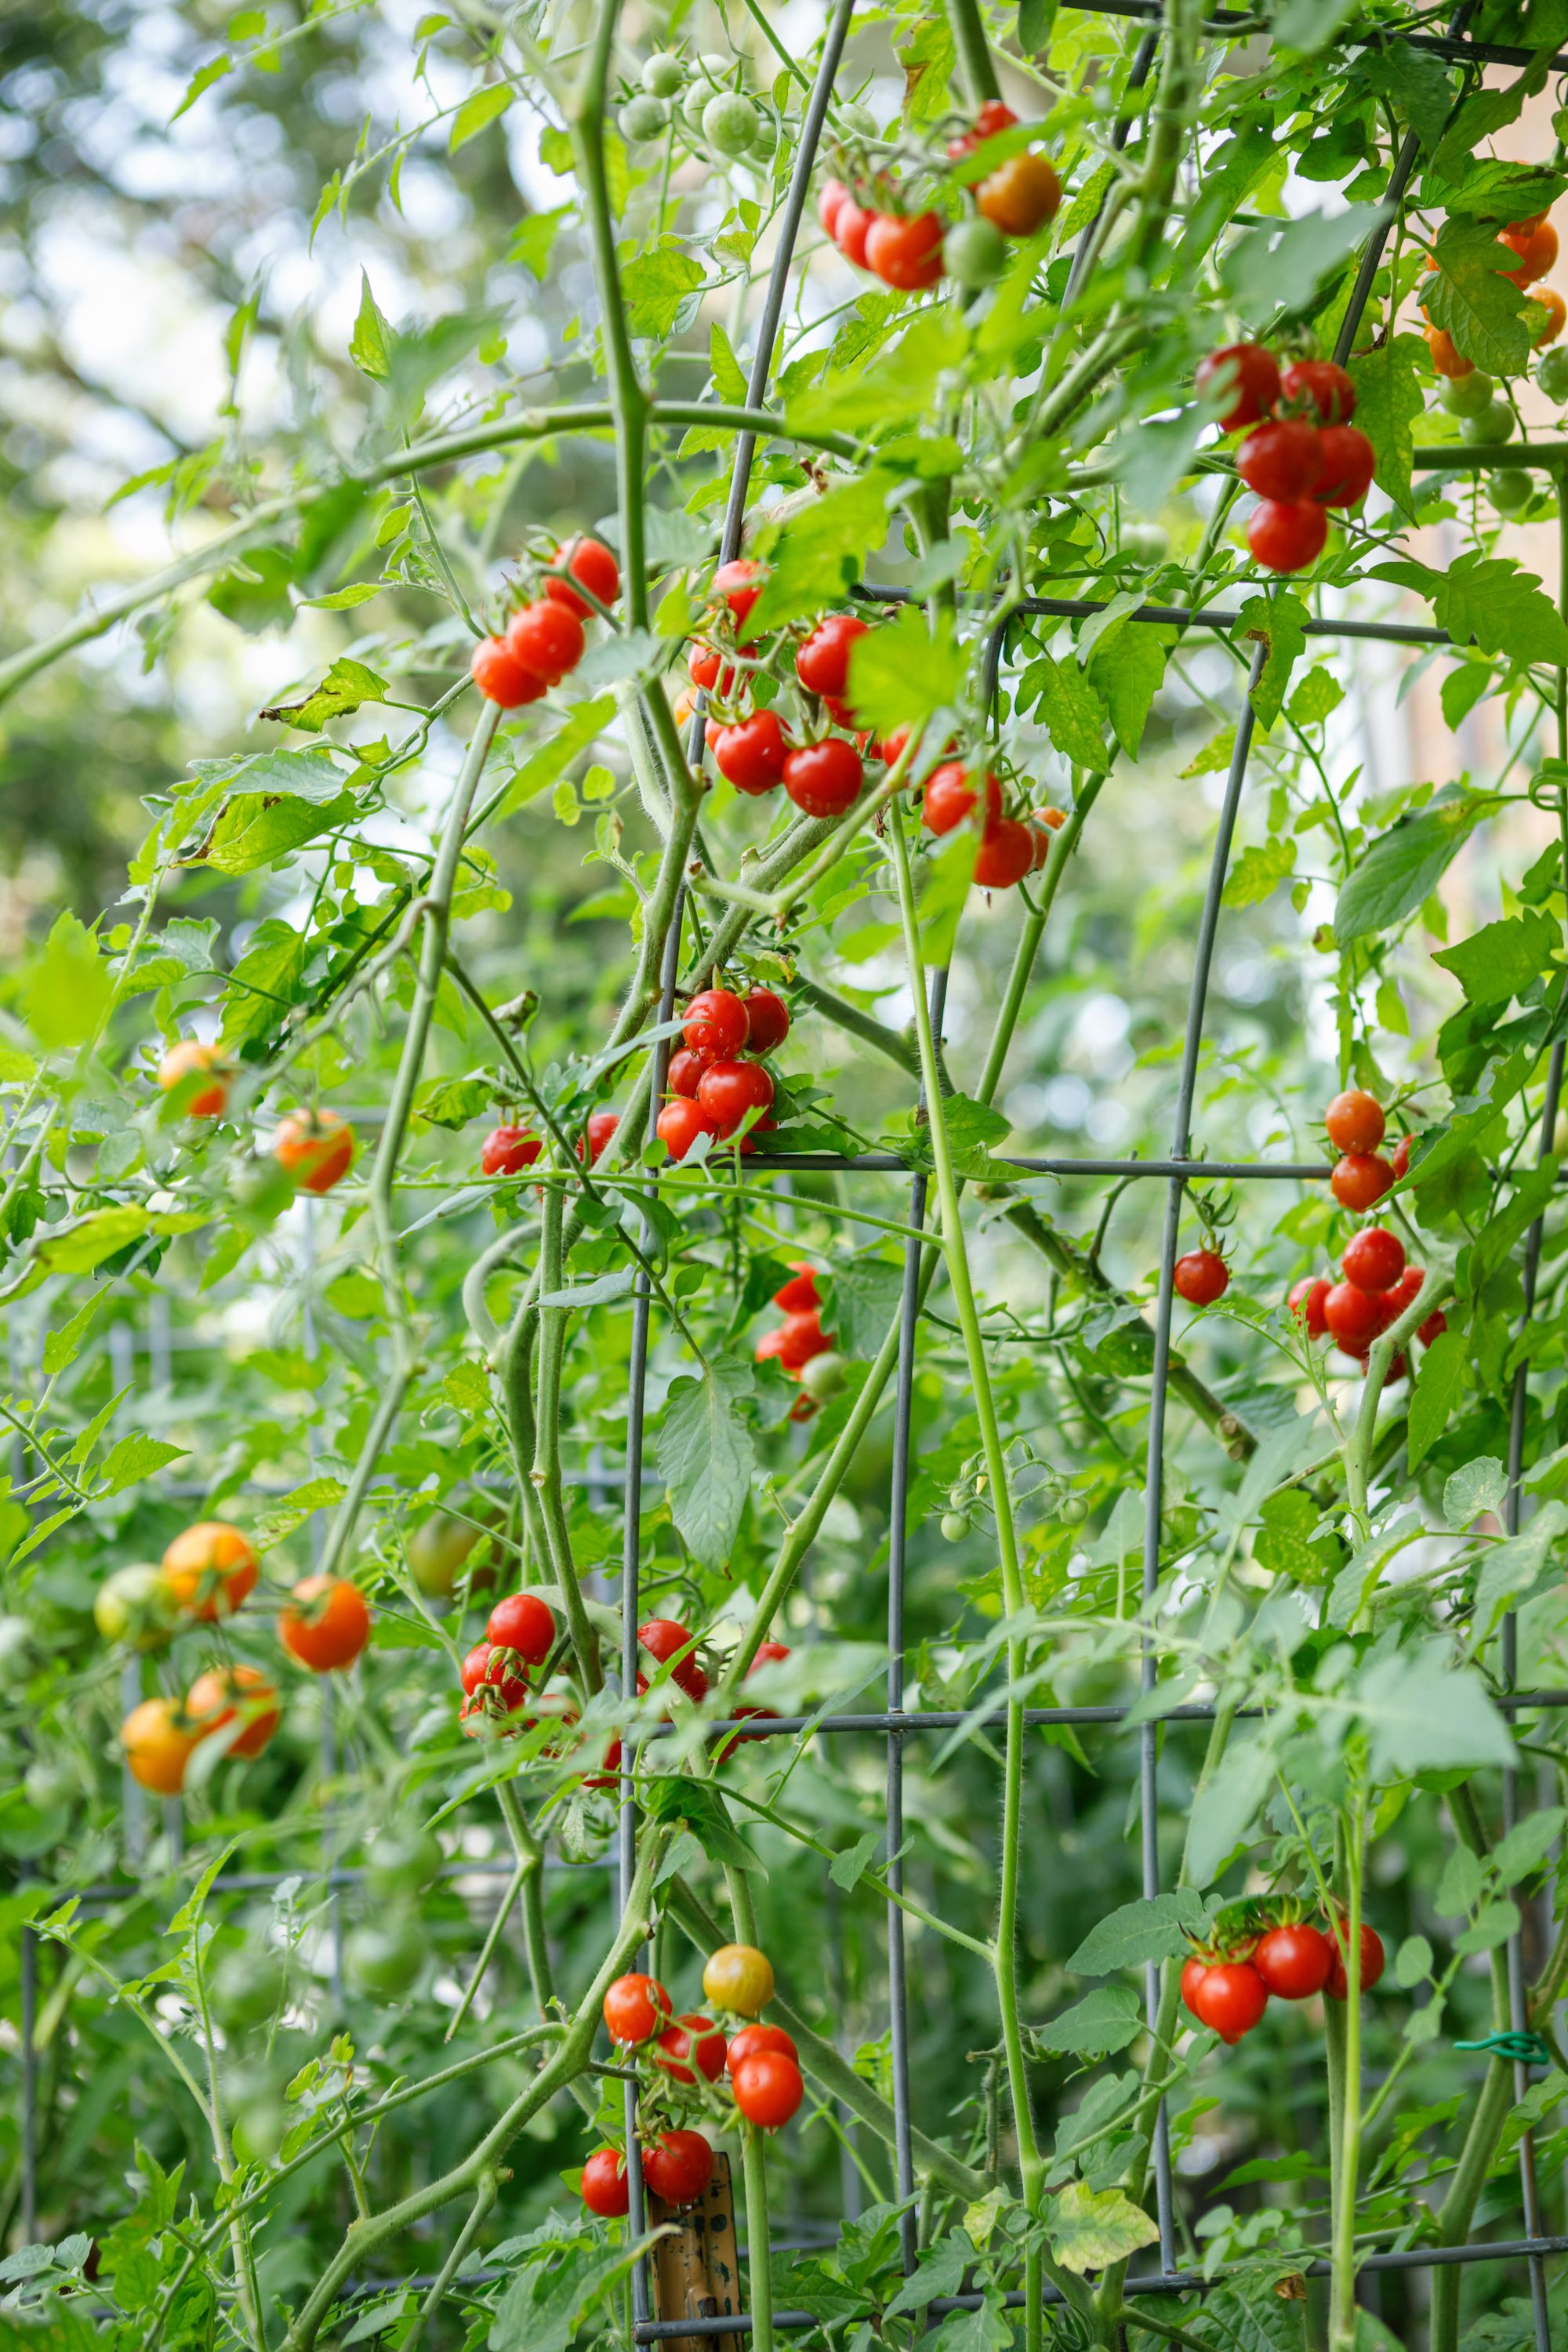 Growing Tomatoes - How To Grow Tomatoes